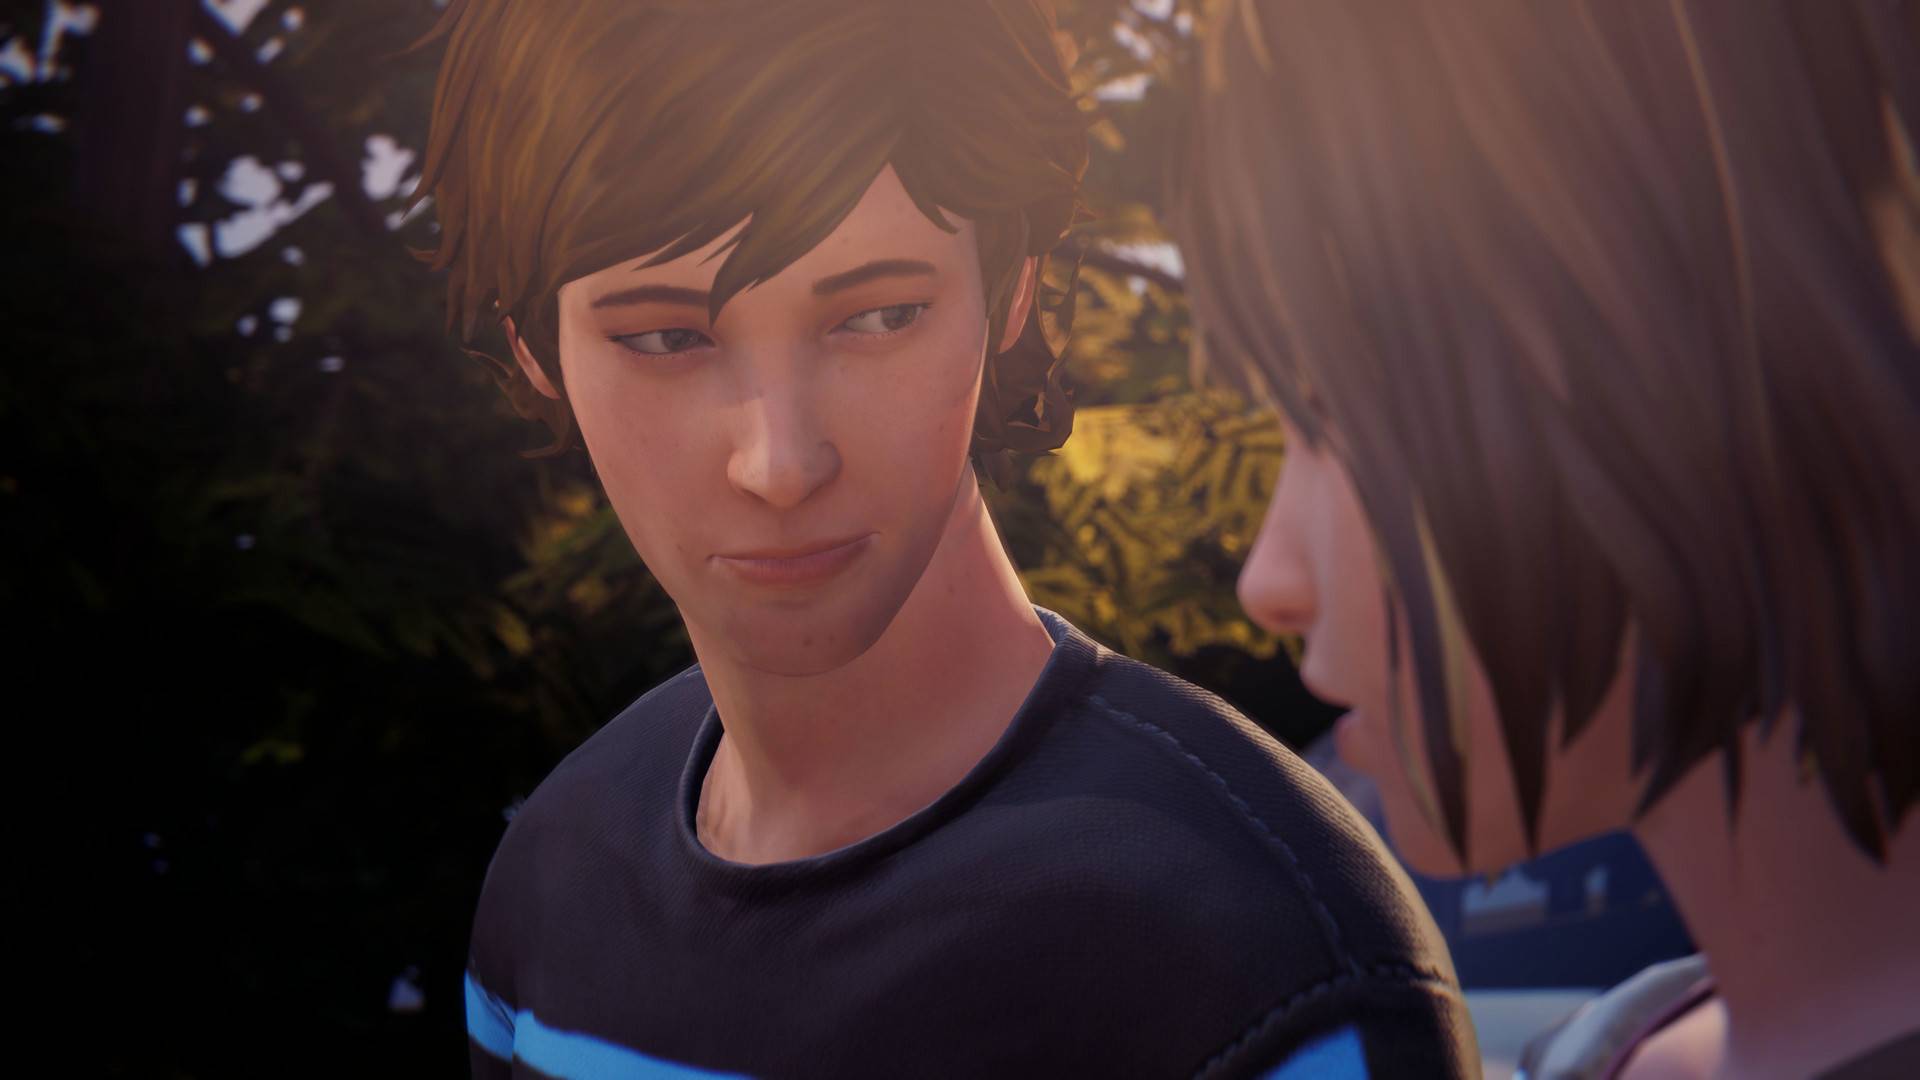 download life is strange ps5 for free